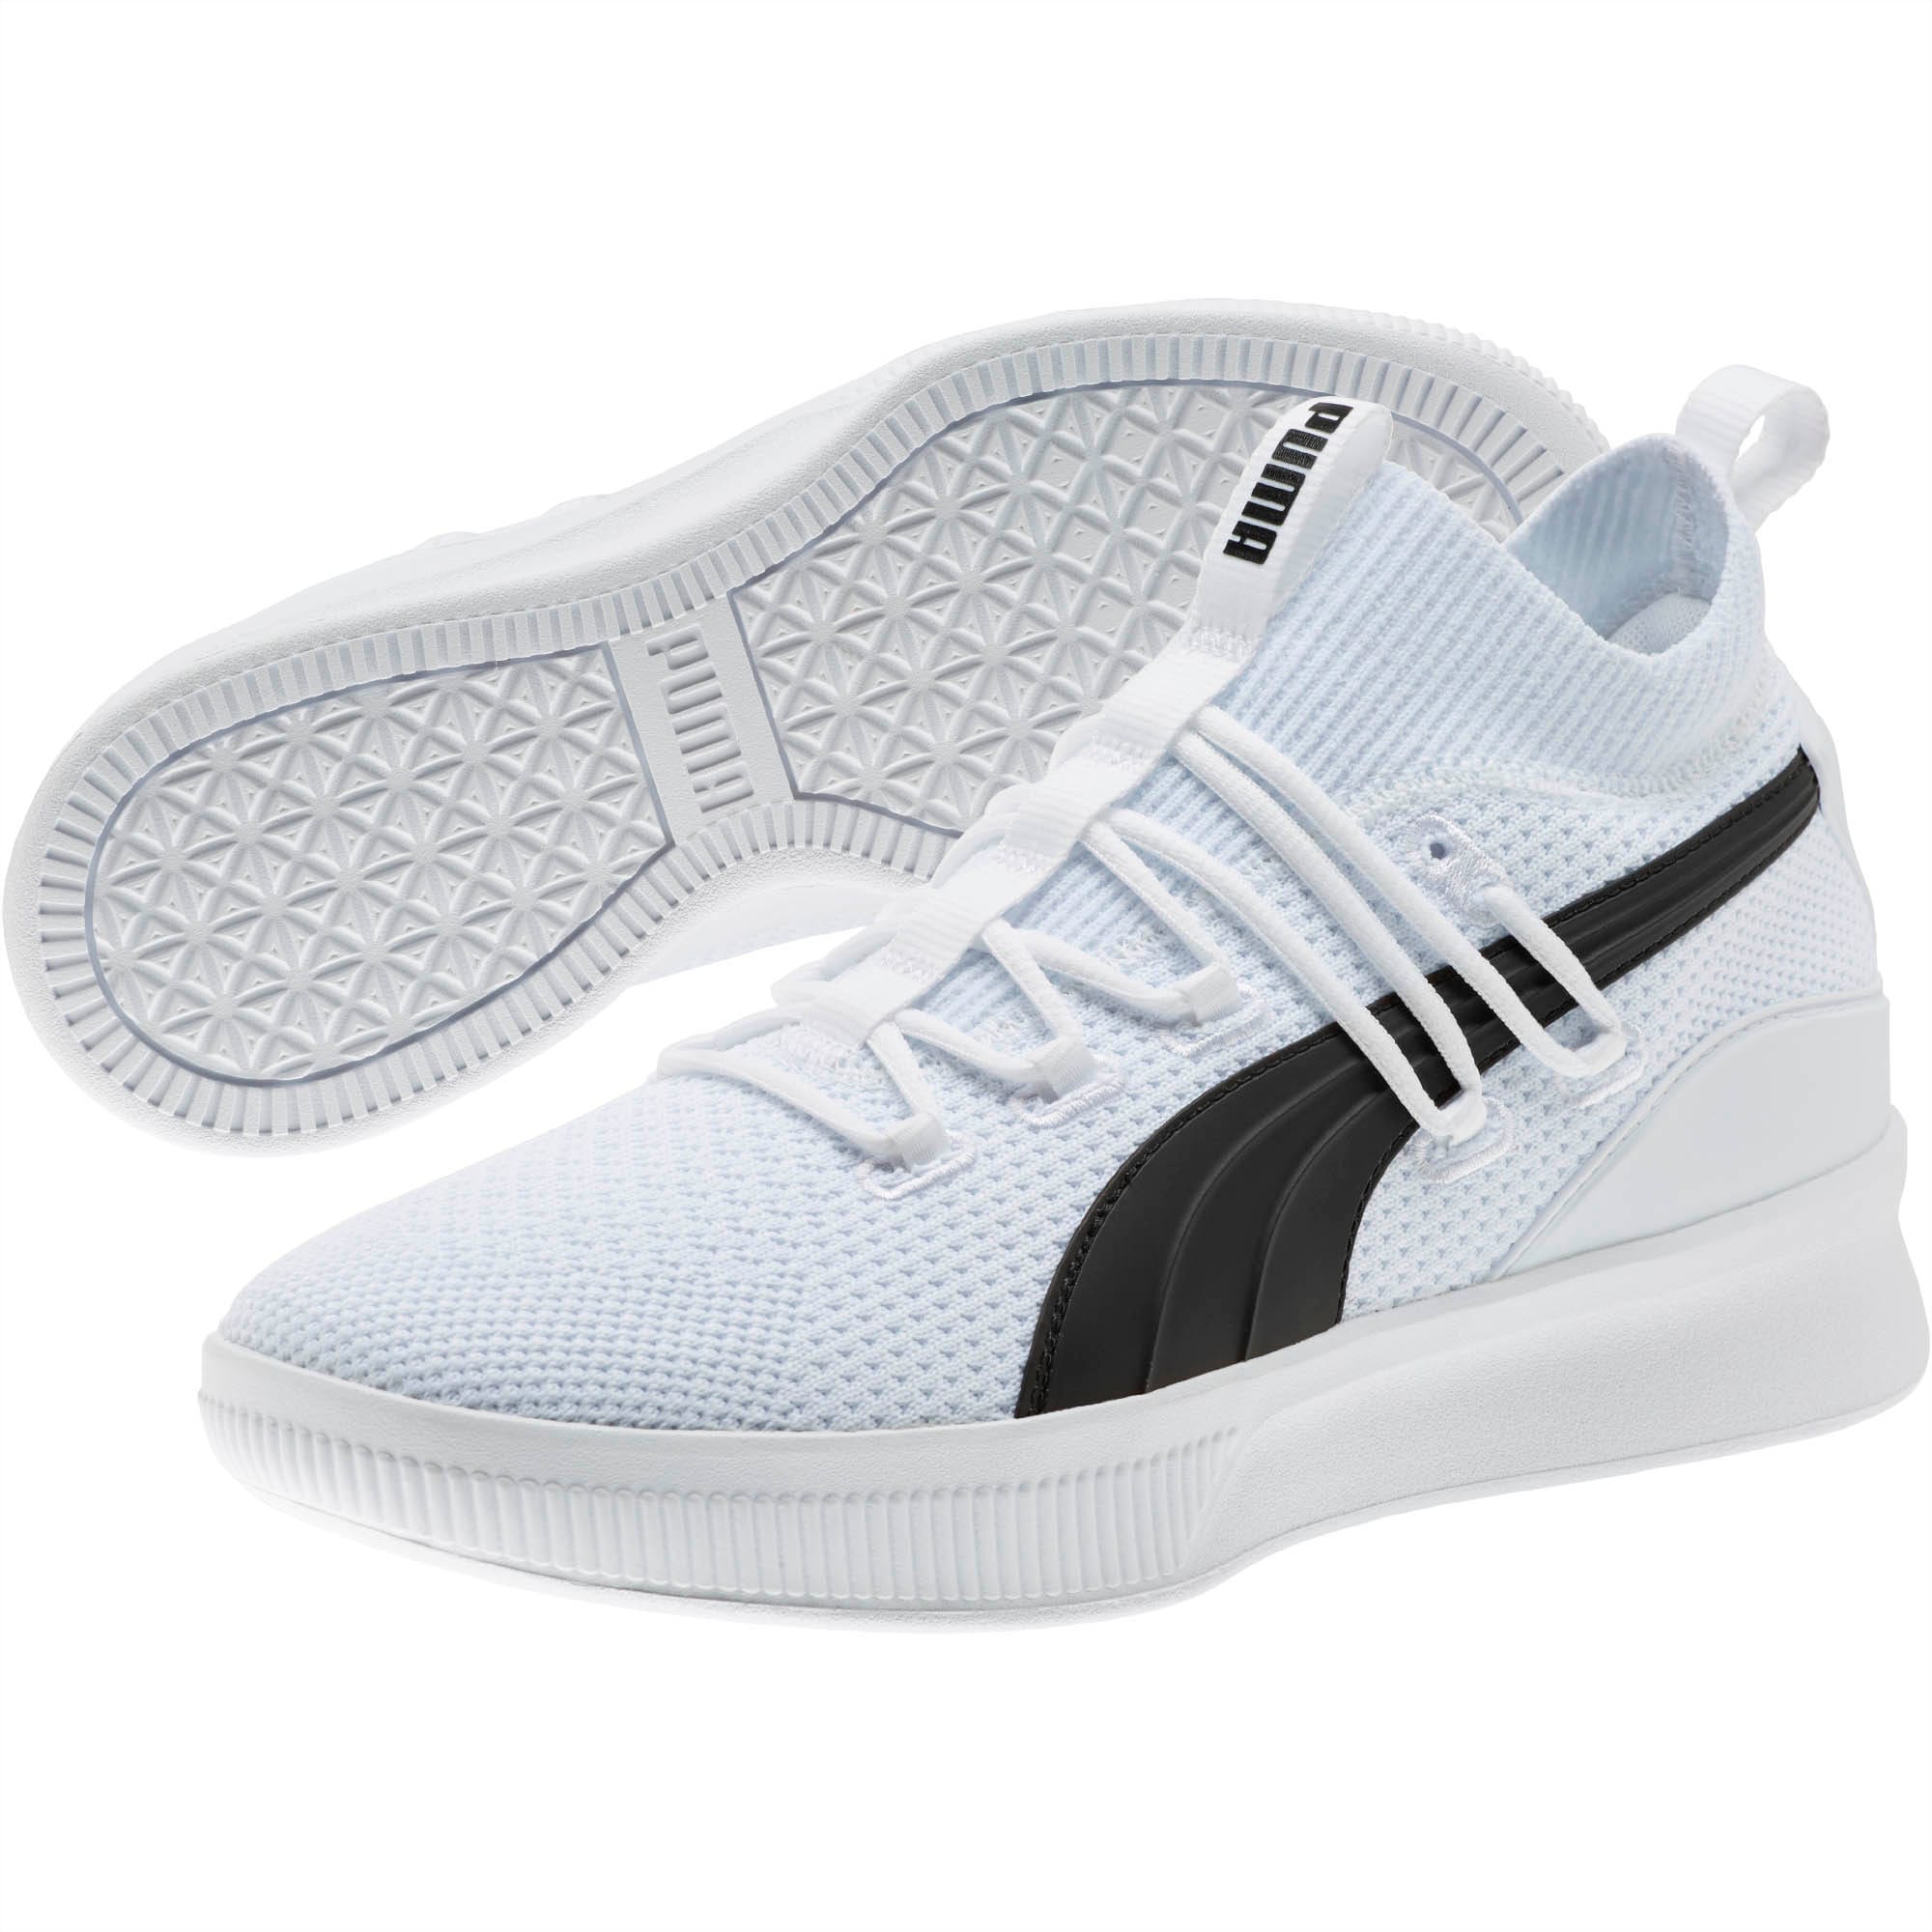 puma clyde court youth